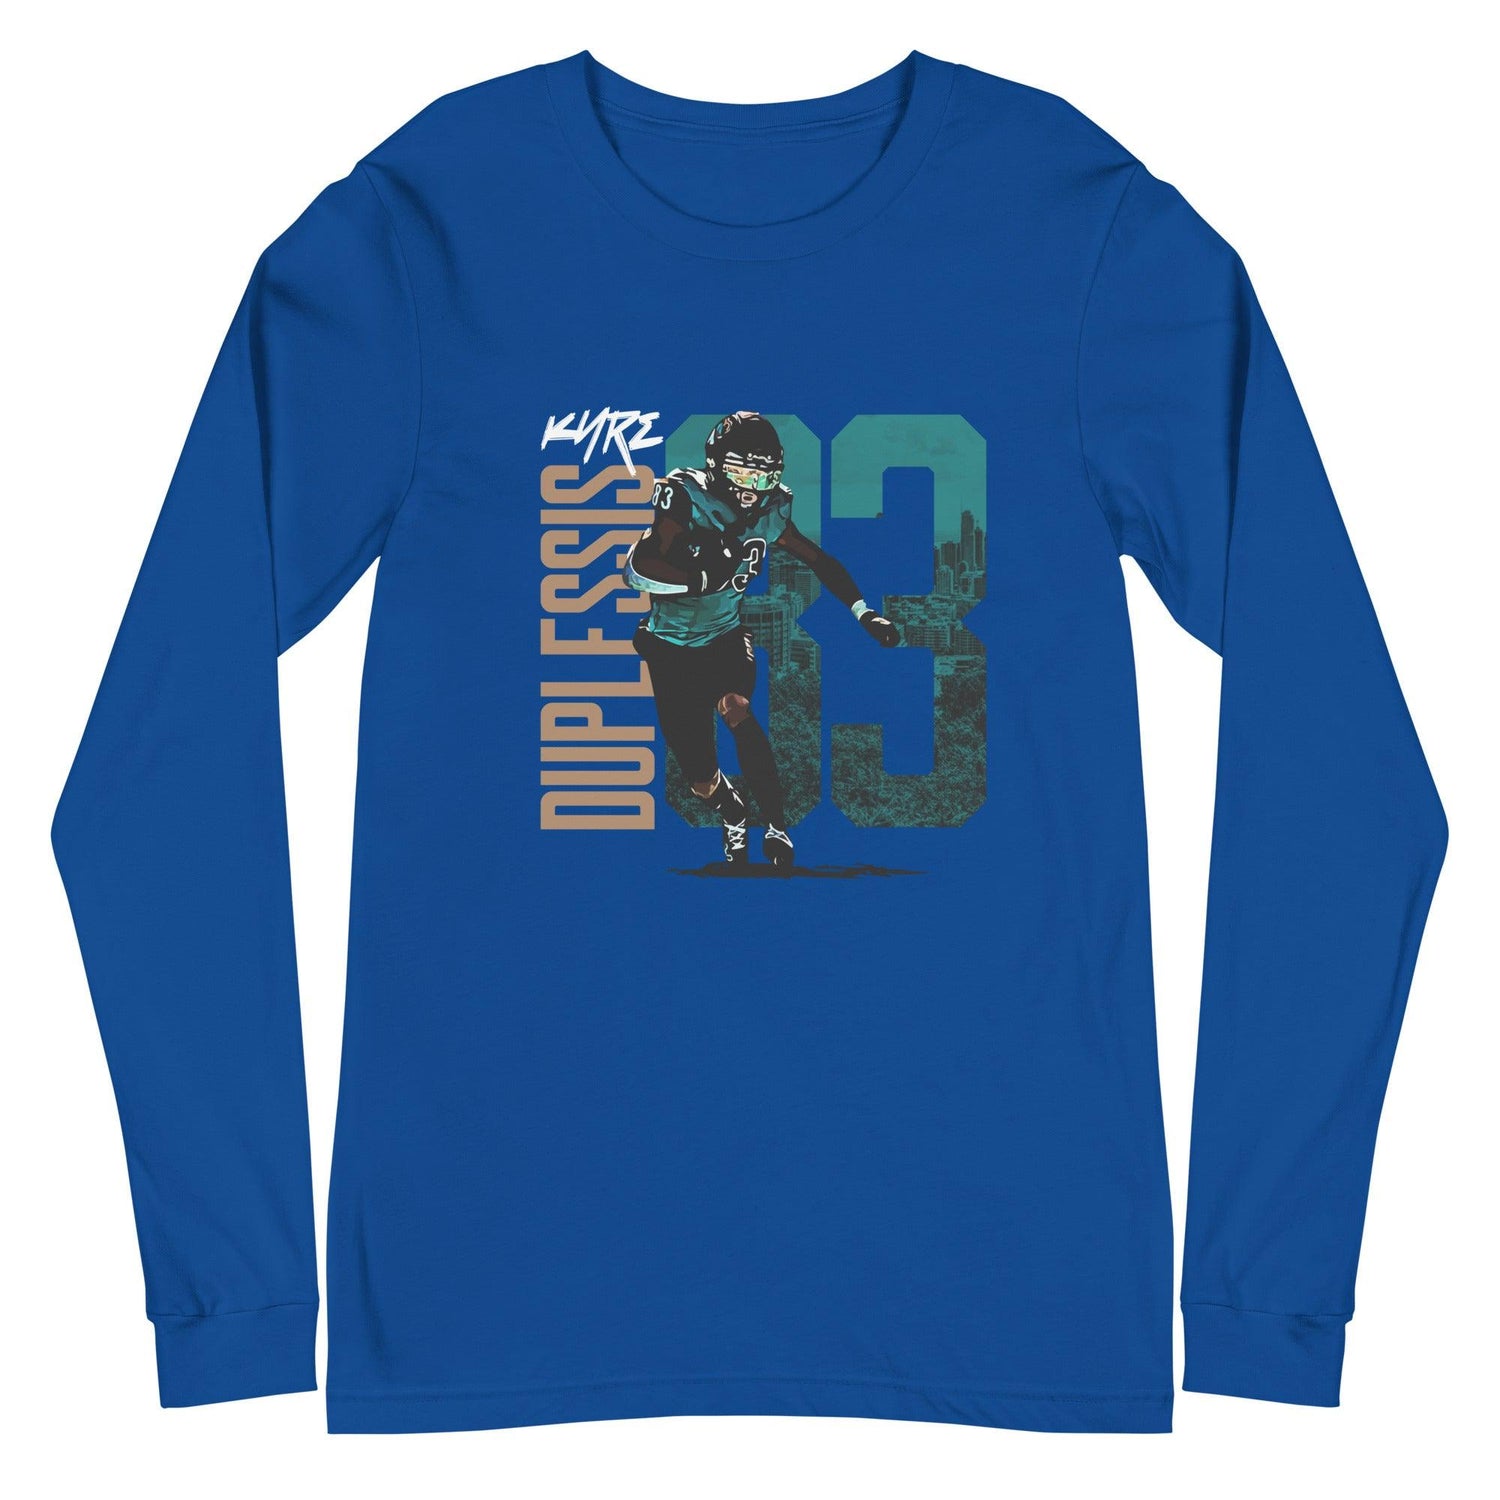 Kyre Duplessis "Gameday" Long Sleeve Tee - Fan Arch